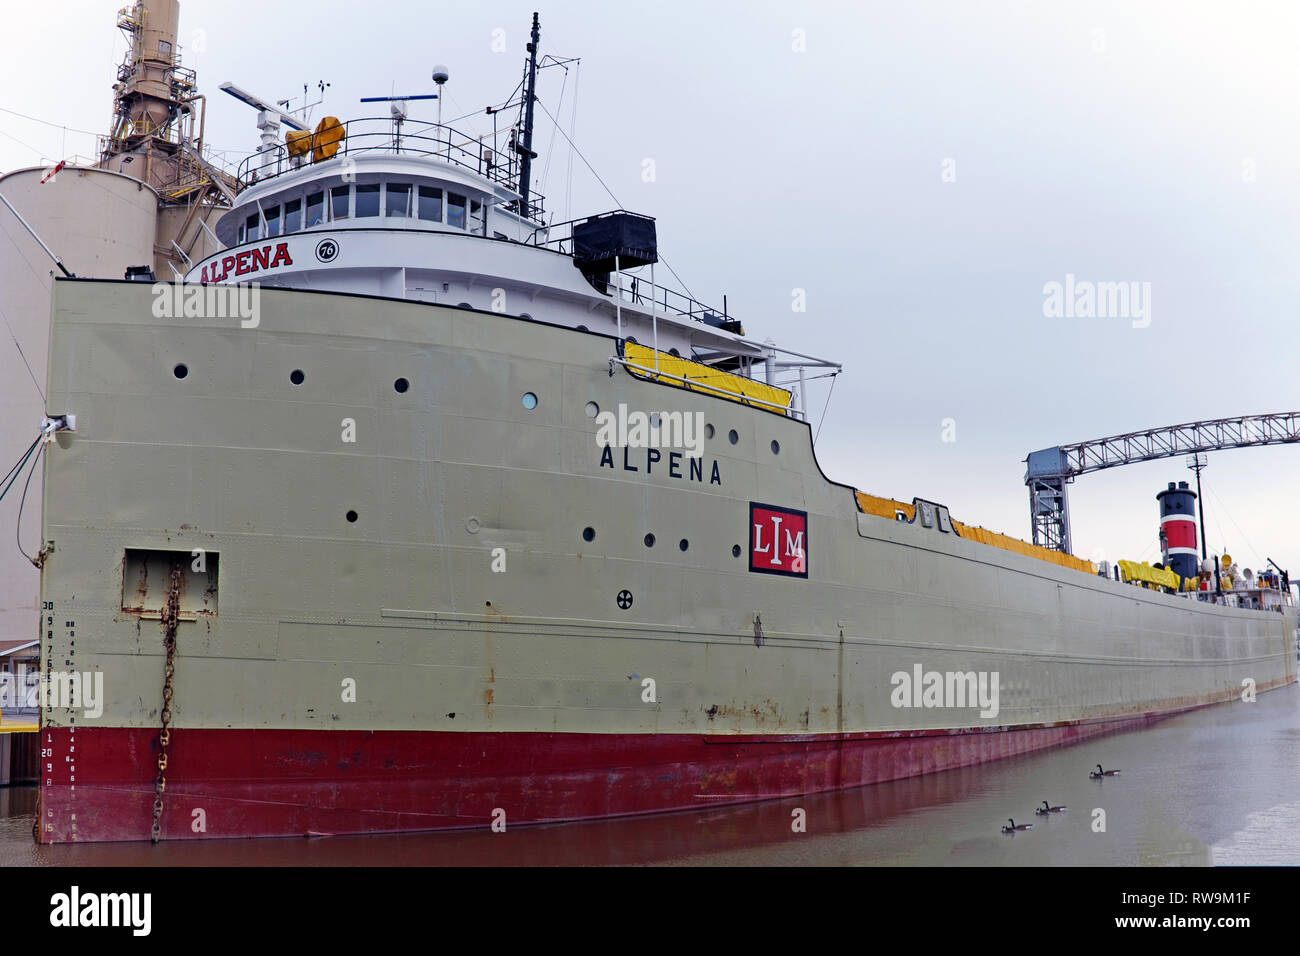 The Alpena Ship, an old and active Great Lakes freighter carrying cement, is docked on the Cuyahoga River in Cleveland, Ohio, USA Stock Photo